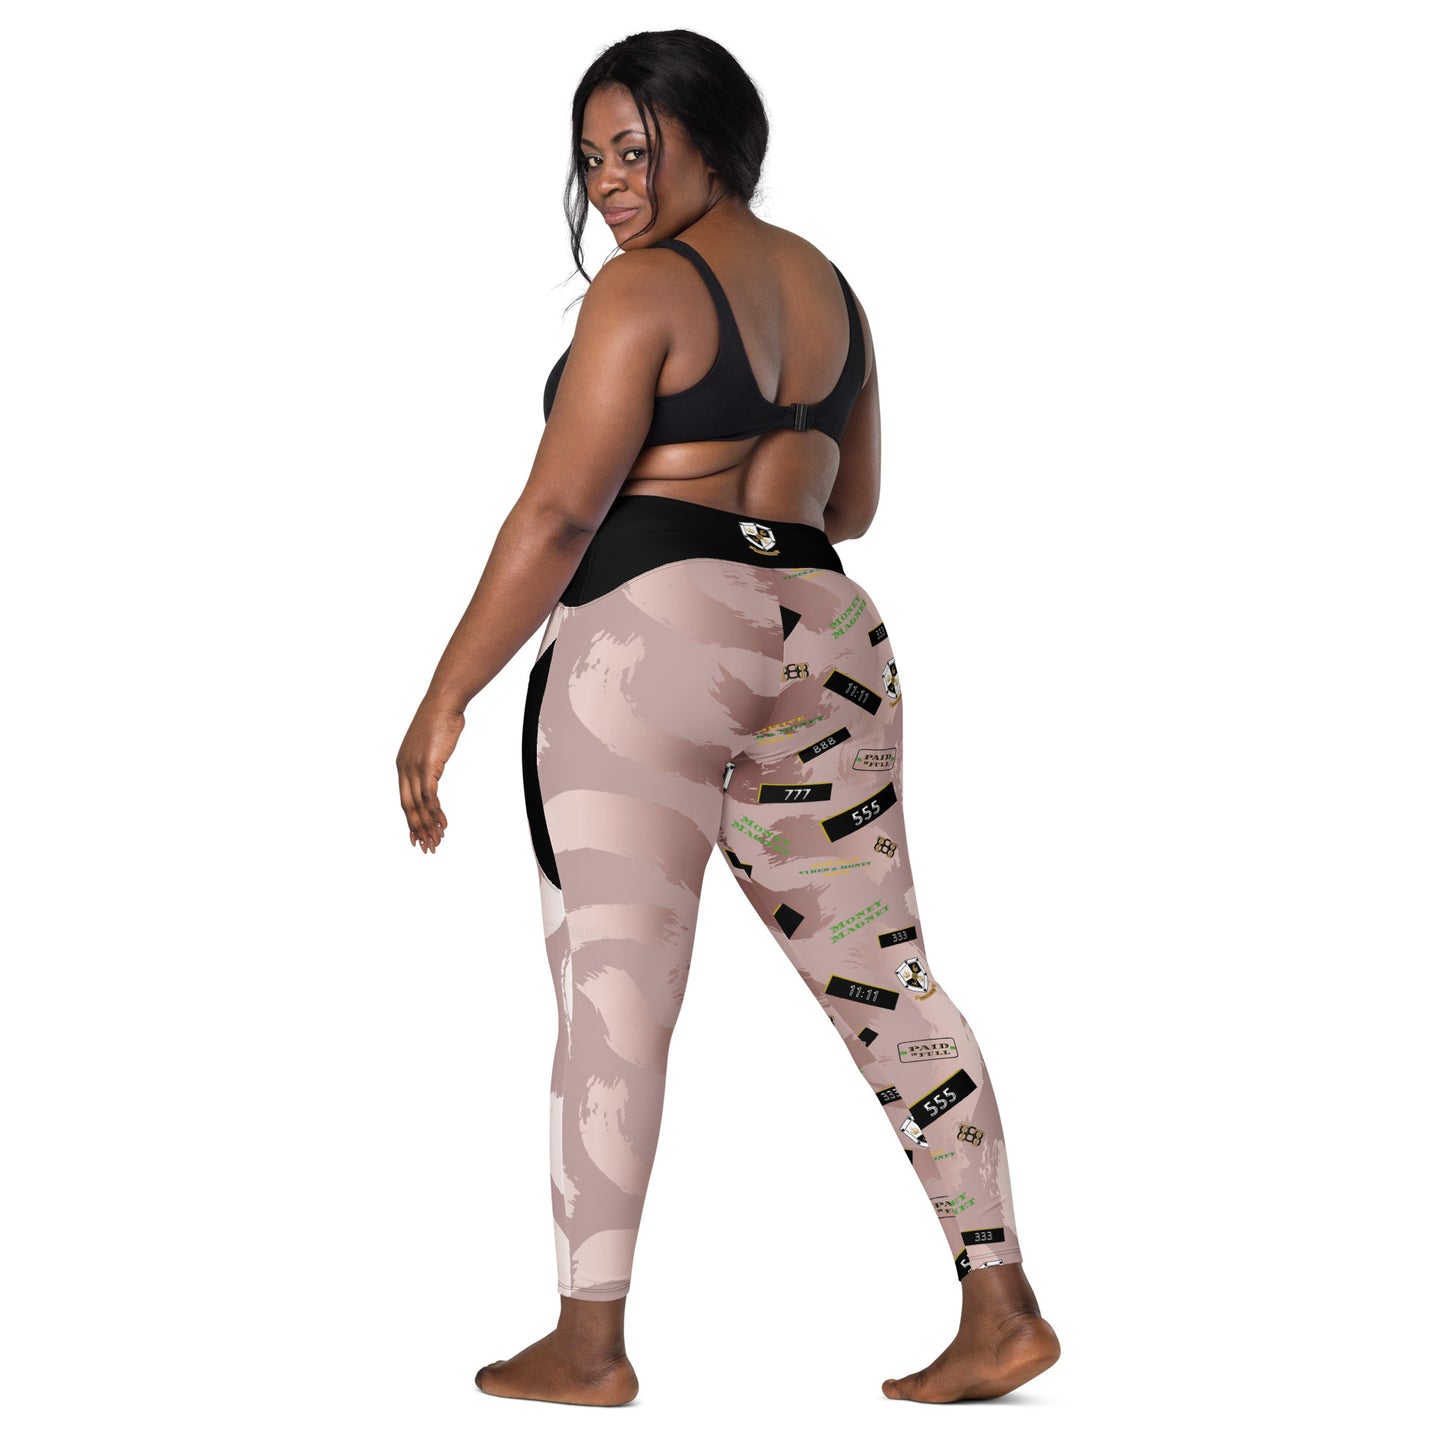 8xquiZit Collection - Women's Manifestation Pynk Slaymingo Marble Crossover Leggings with Pockets